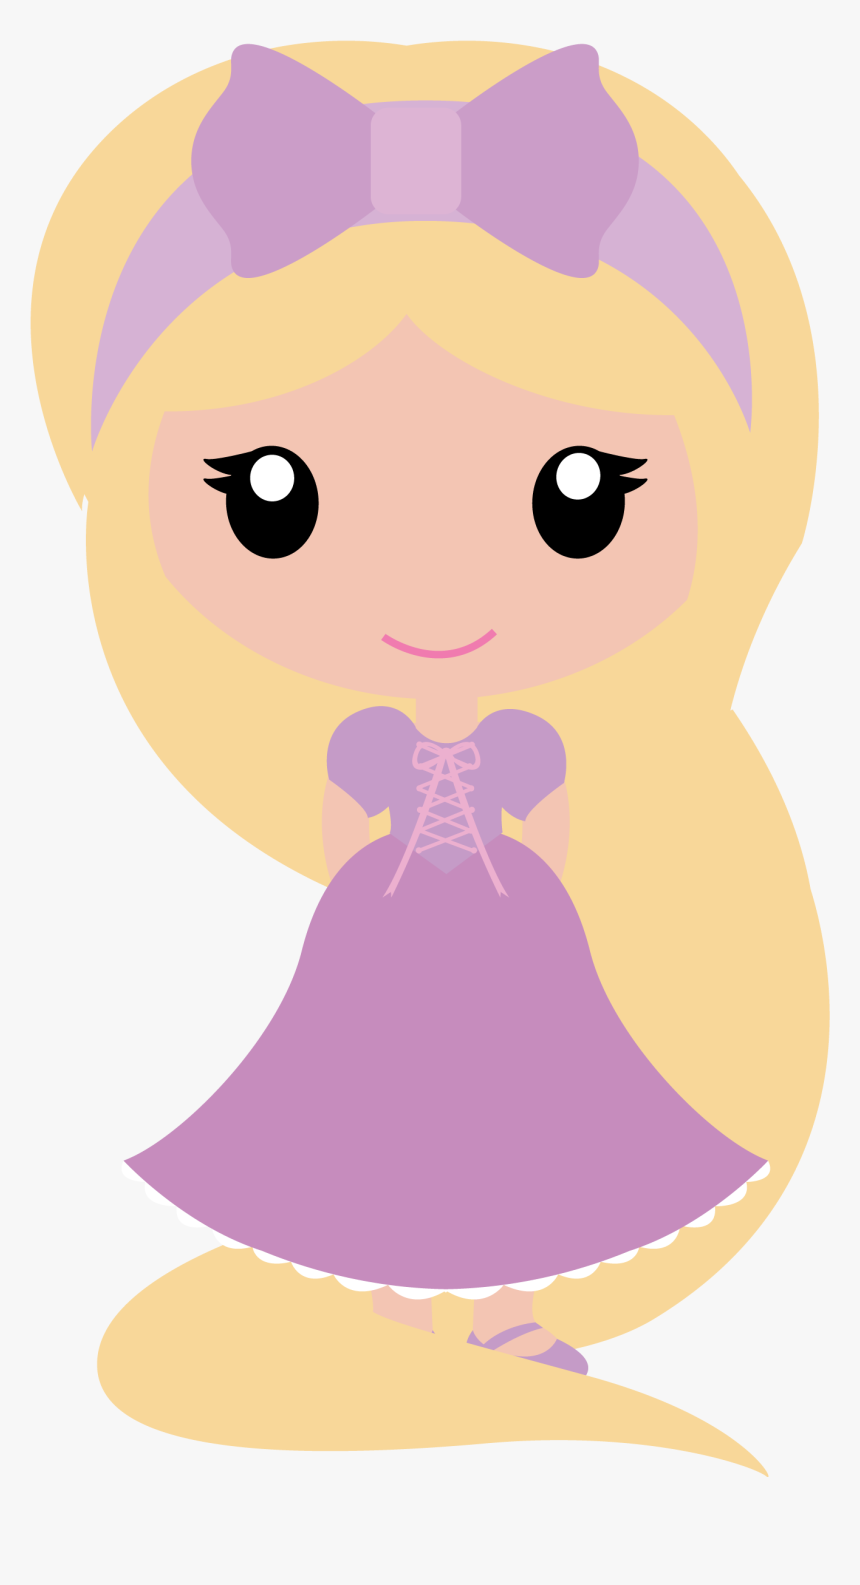 Clip art of Rapunzel from Tangled: The Series #disney, #tangled - Clip ...